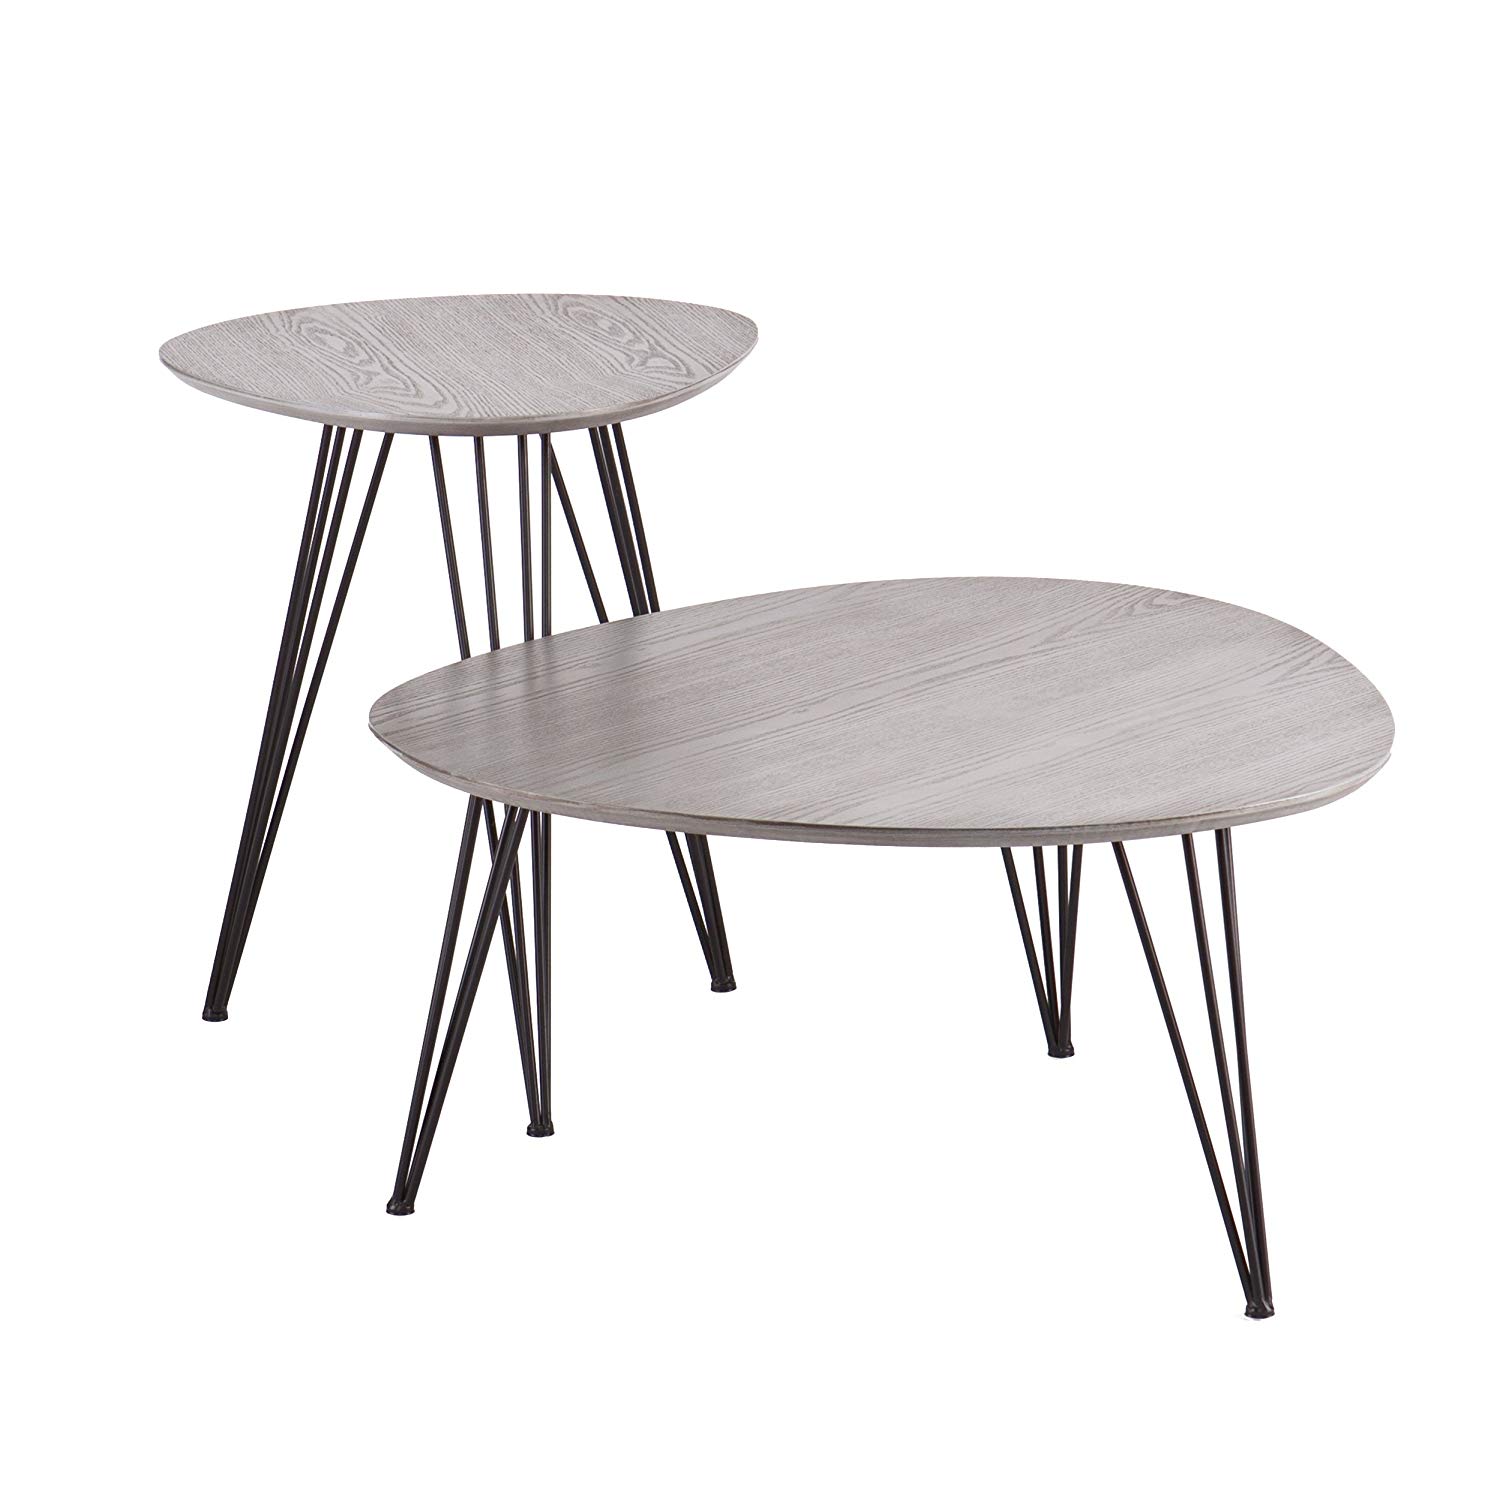 holly martin bannock accent table set matte gray furniture with black finish kitchen dining mirrored side clear chest end unique chairs leather ott coffee target mid century